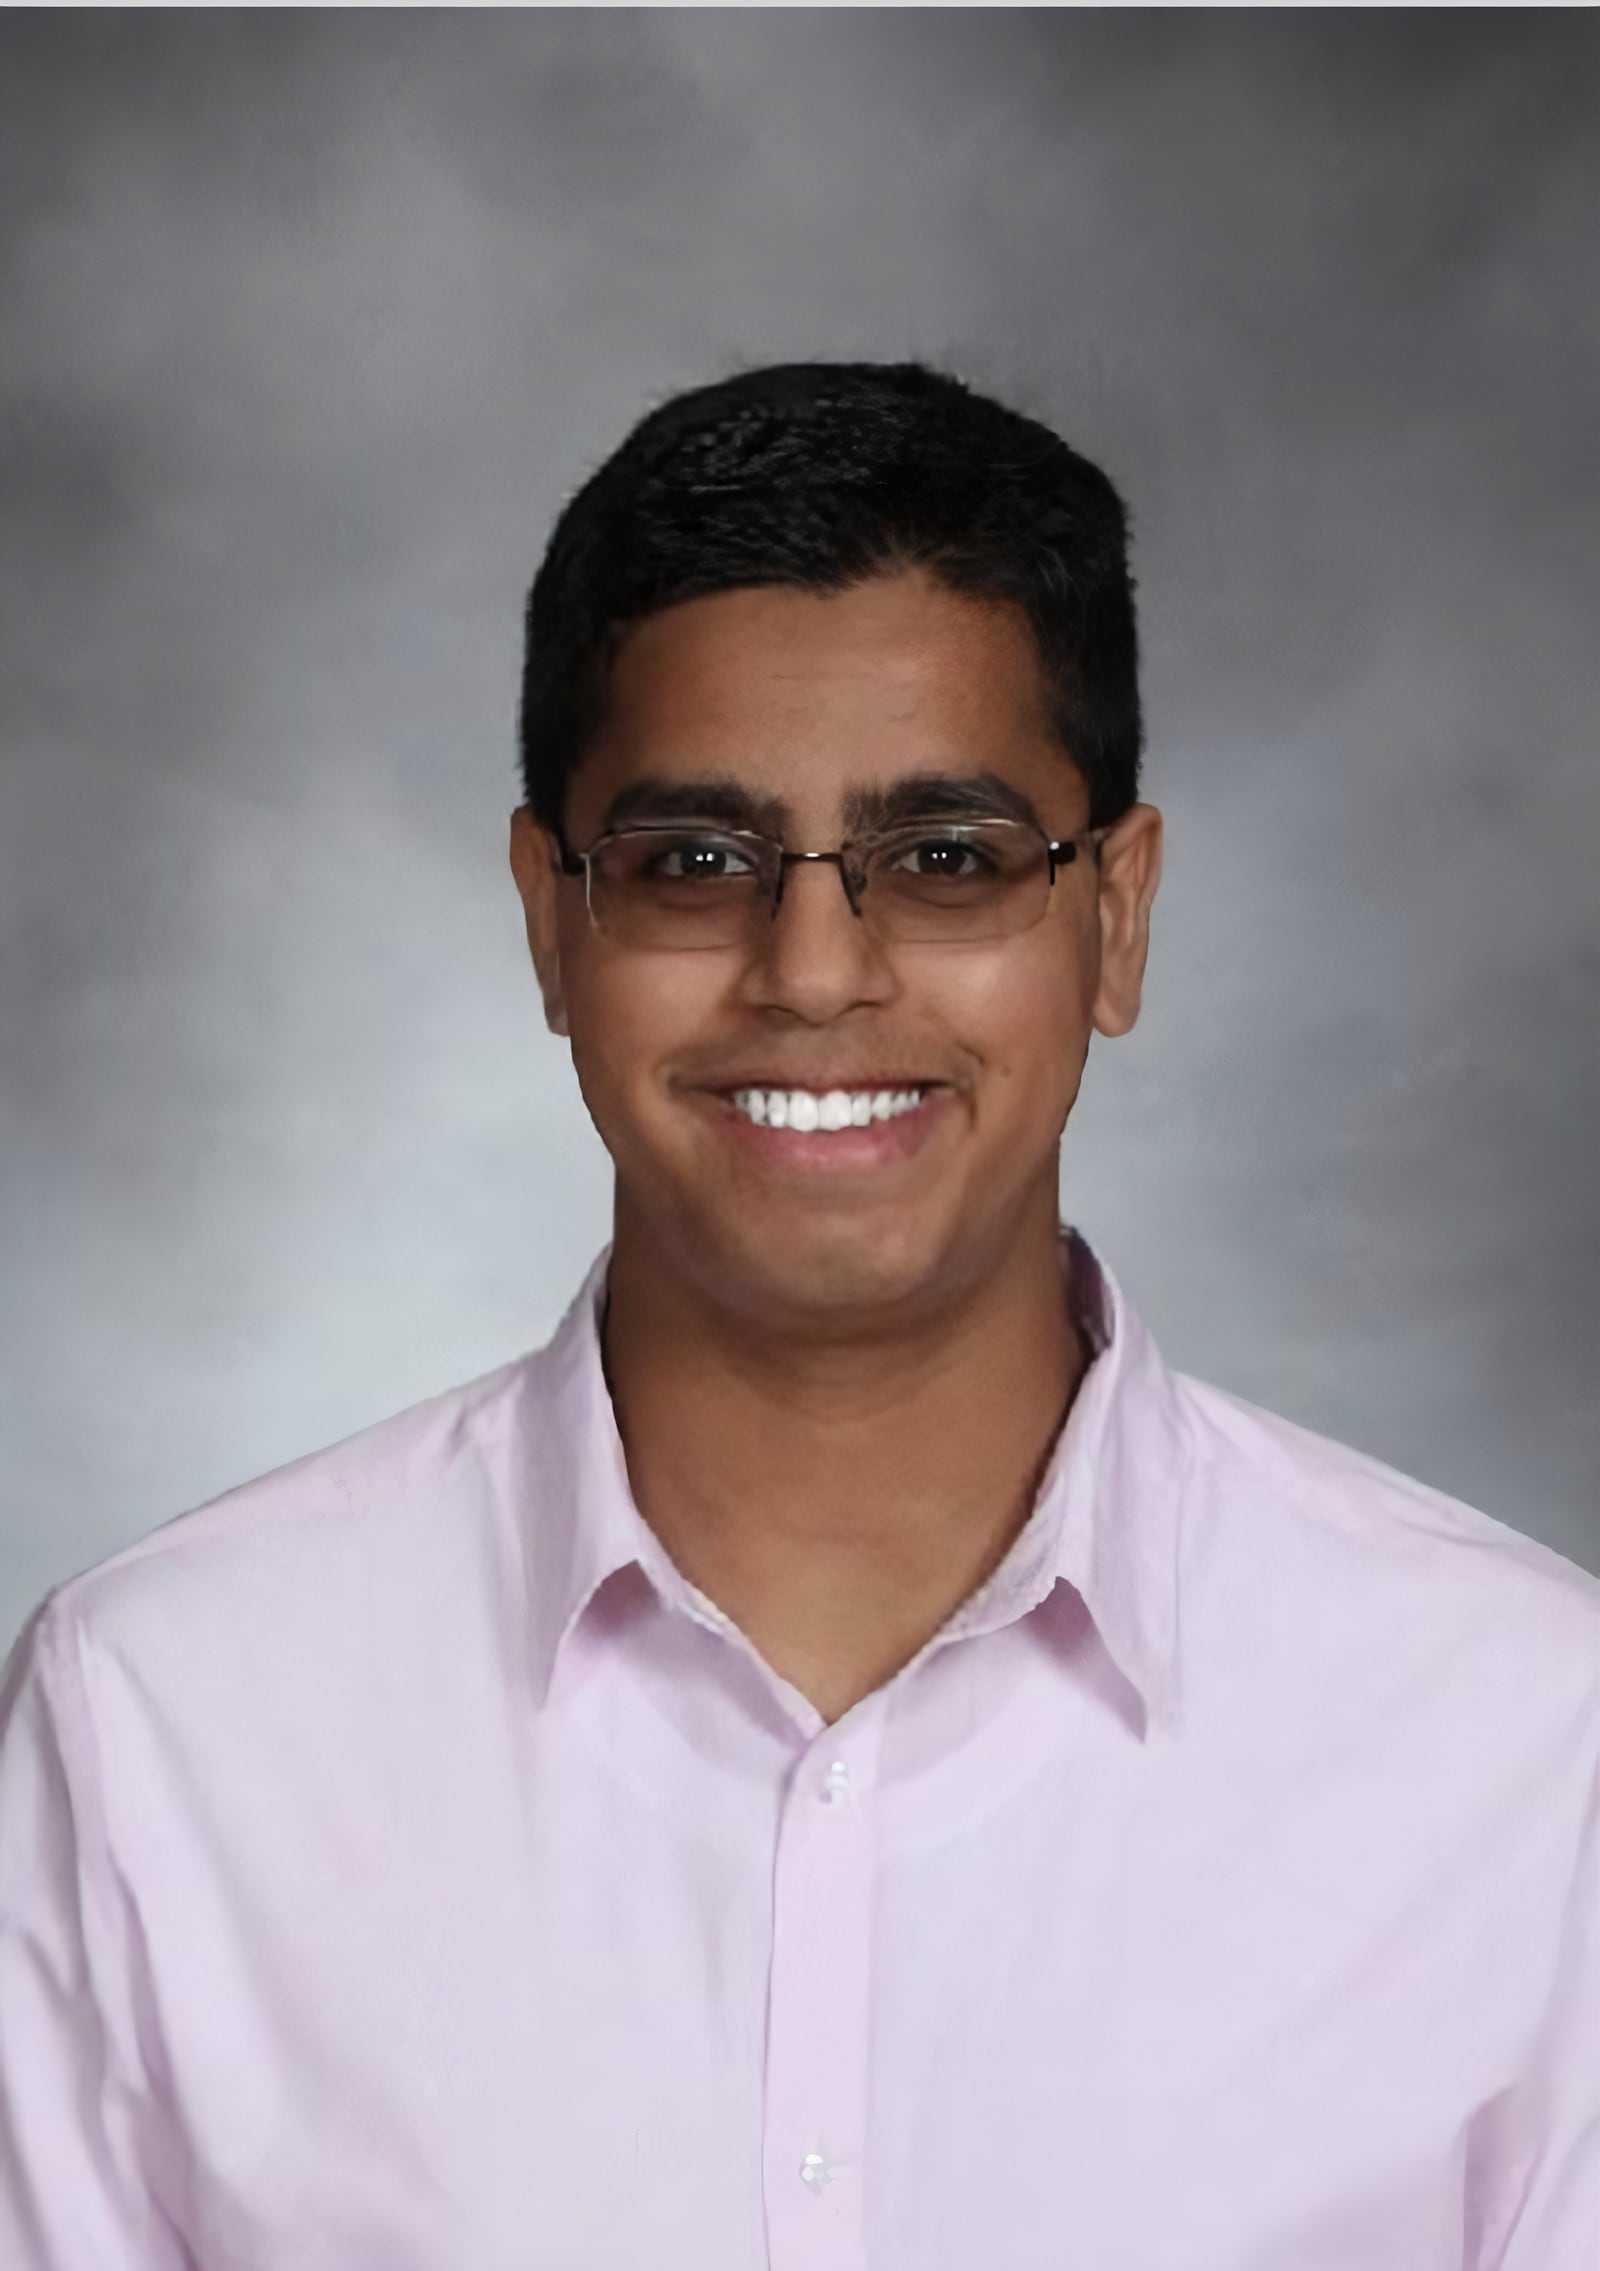 St. Charles East High School Student Joins Illinois Science Olympiad